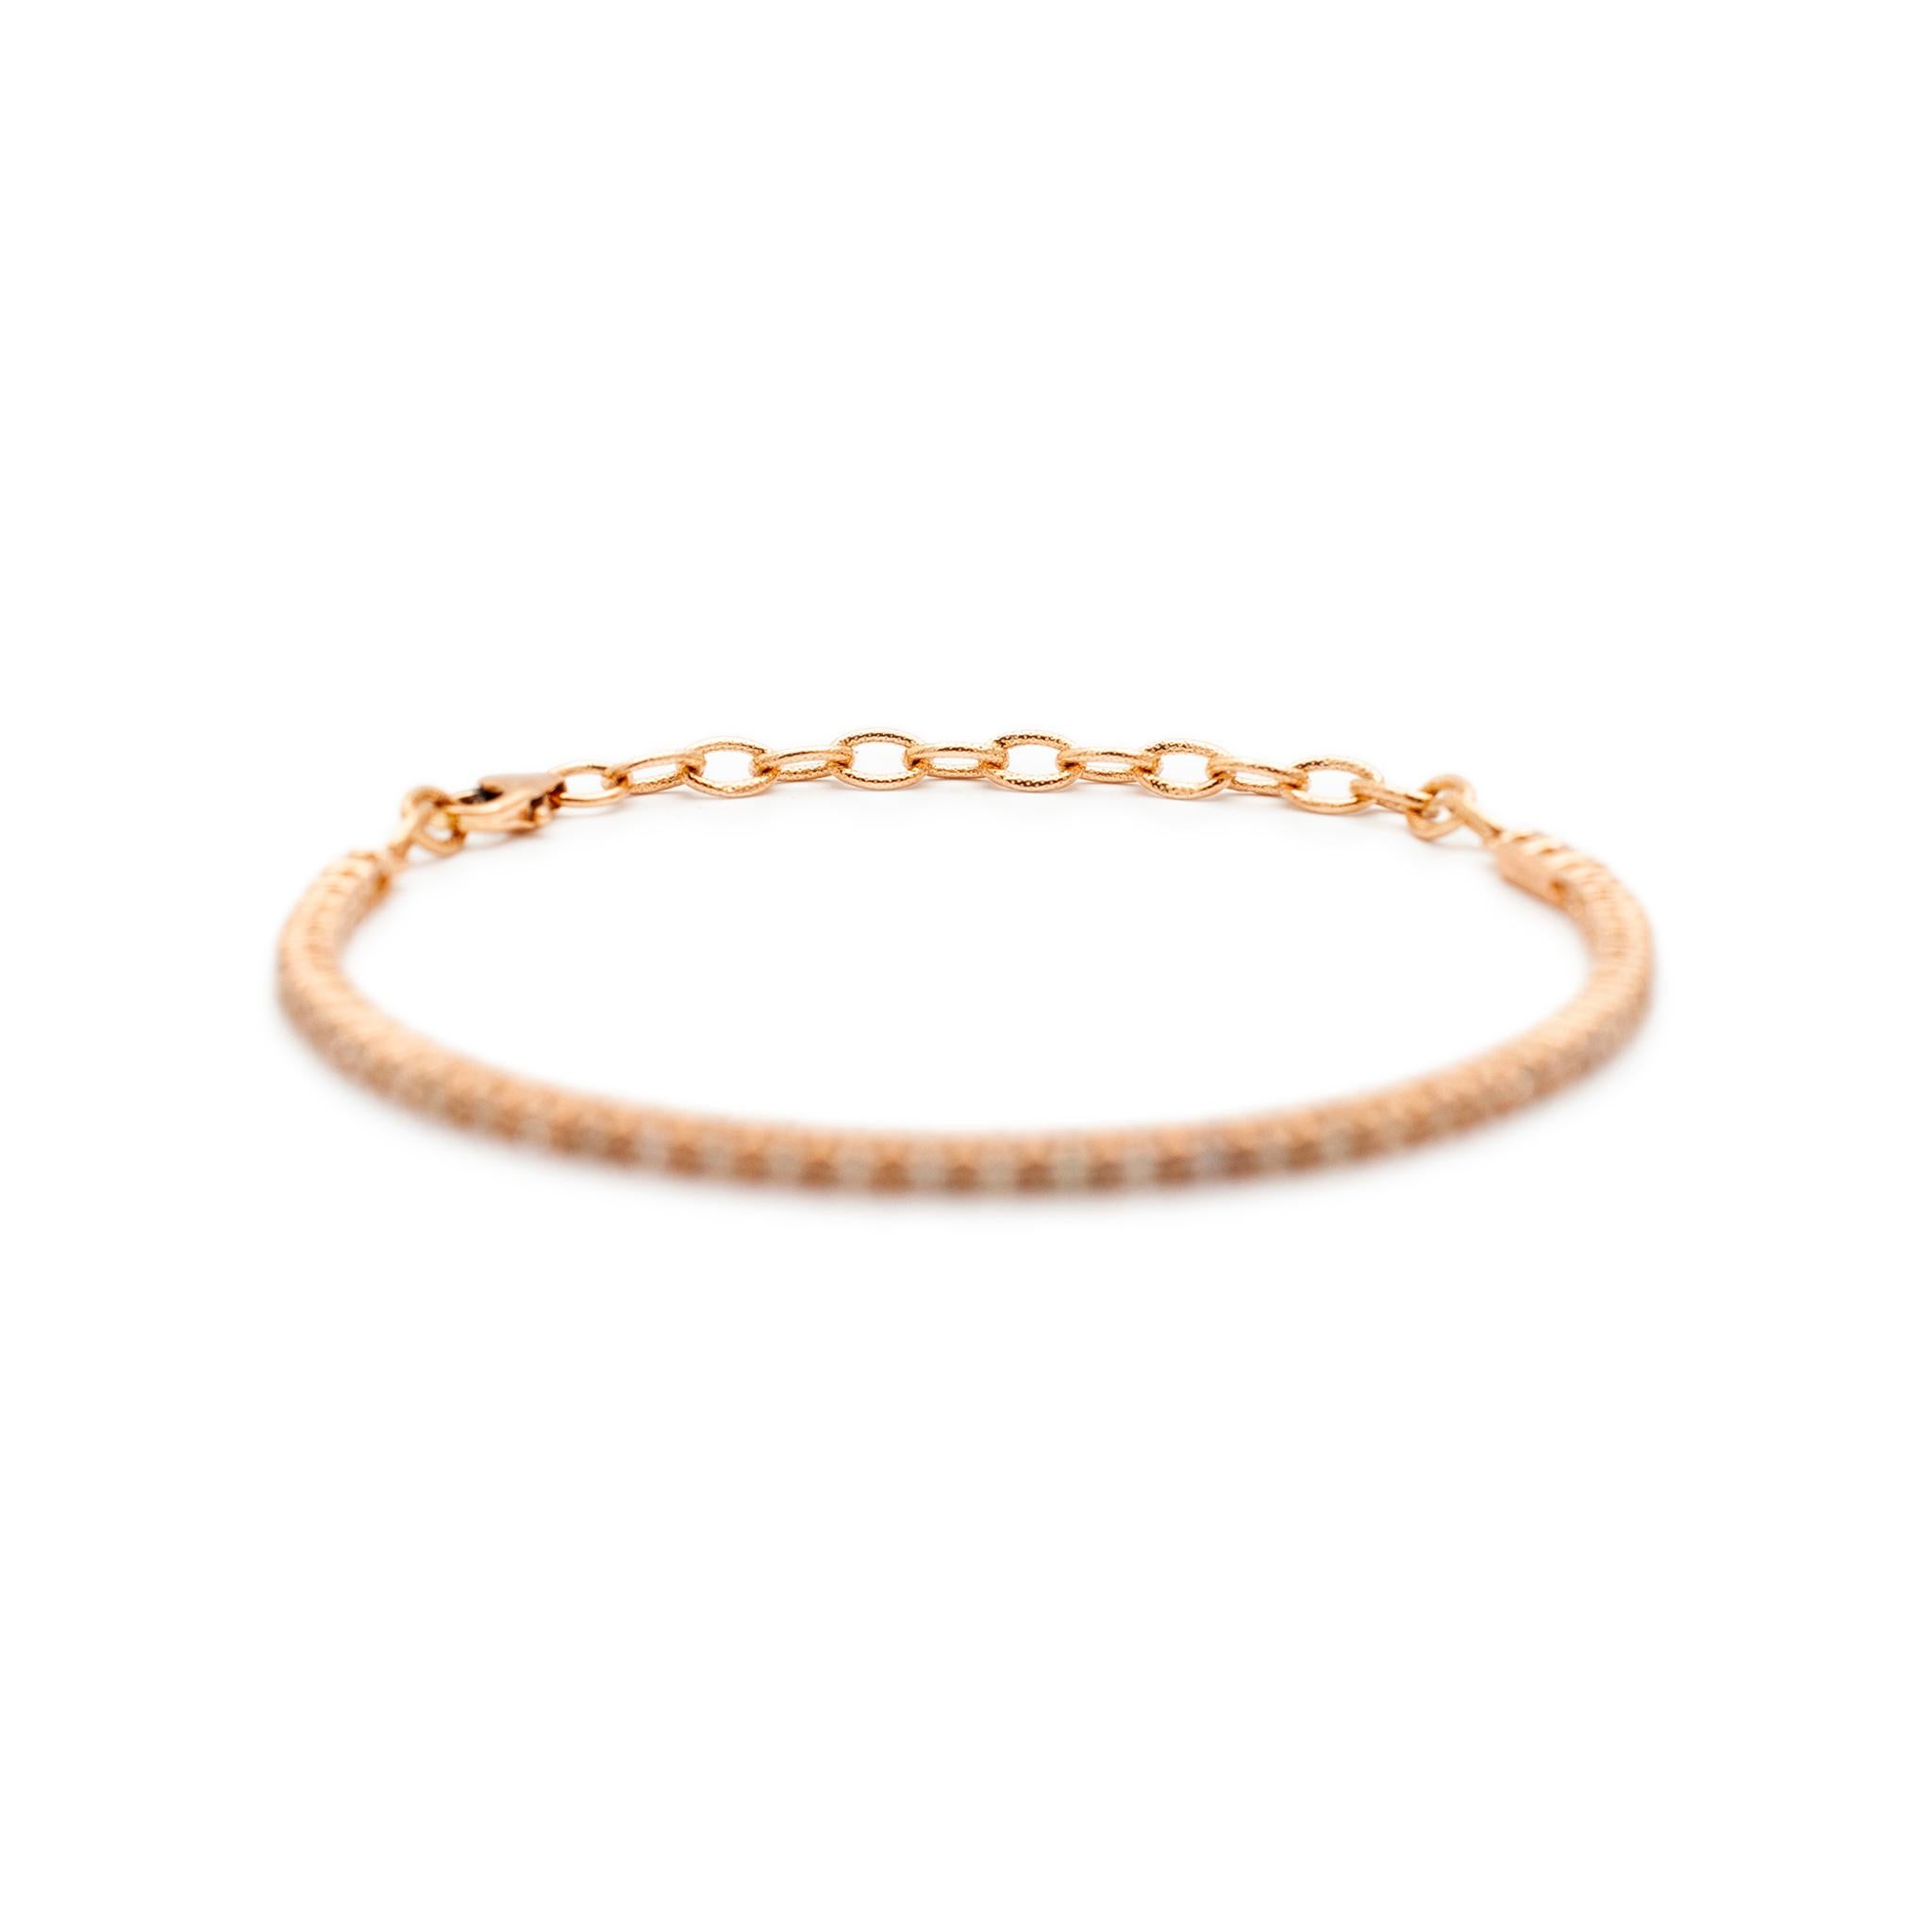 Brand: Levian

Gender: Ladies

Metal Type: 14K Rose Gold

Length: 6.25 Inches

Width: 3.30 mm tapering to 2.00 mm

Weight: 4.13 grams

Ladies 14K rose gold diamond tennis line bracelet. The metal was tested and determined to be 14K rose gold.